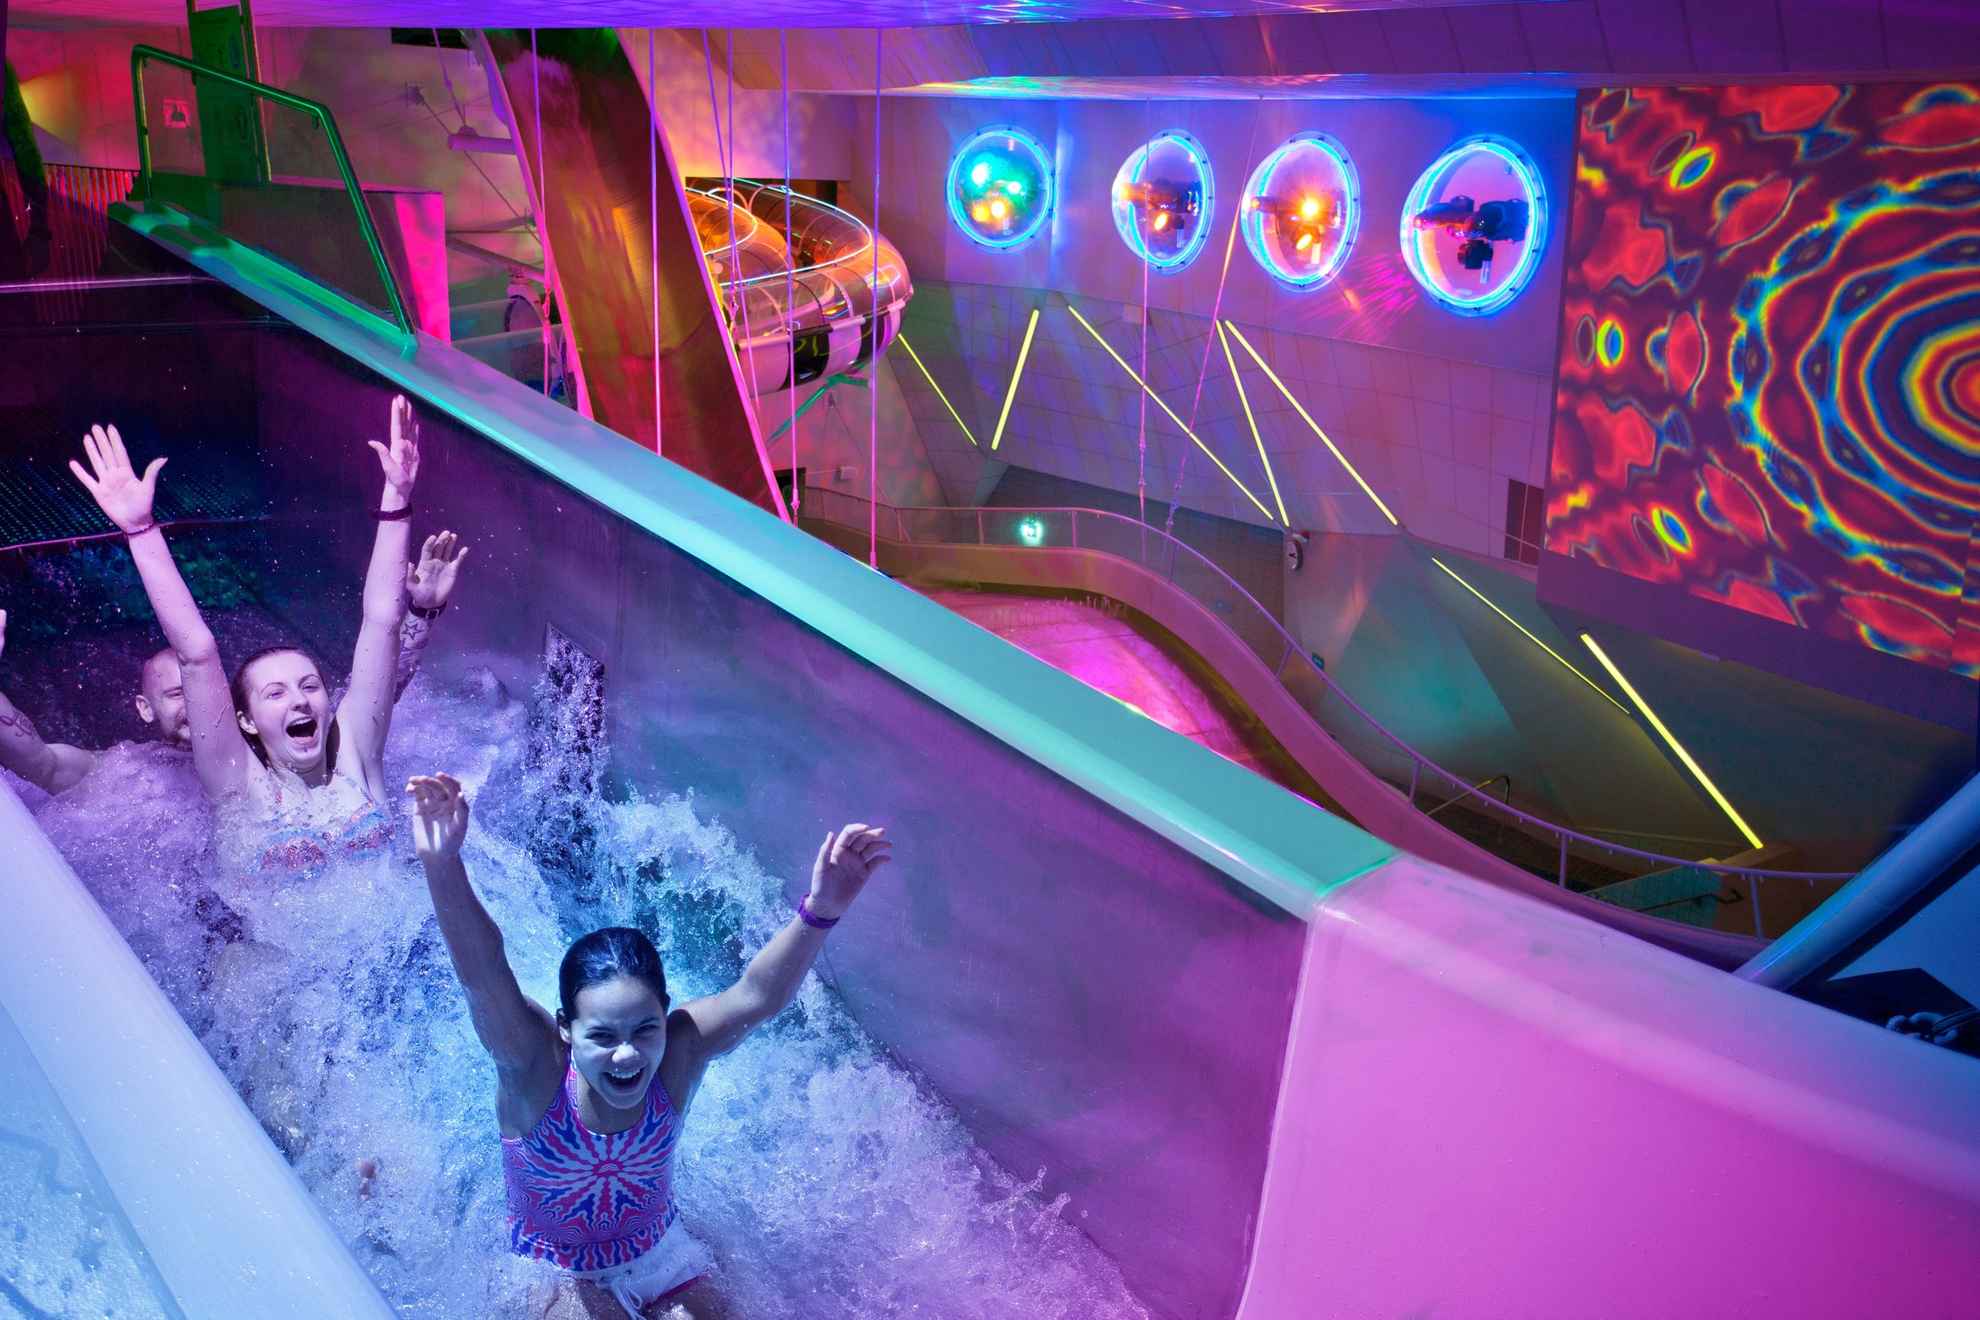 Three people smile and hold up their arms as they go down a water slide. The area is mostly in purple and neon lights.